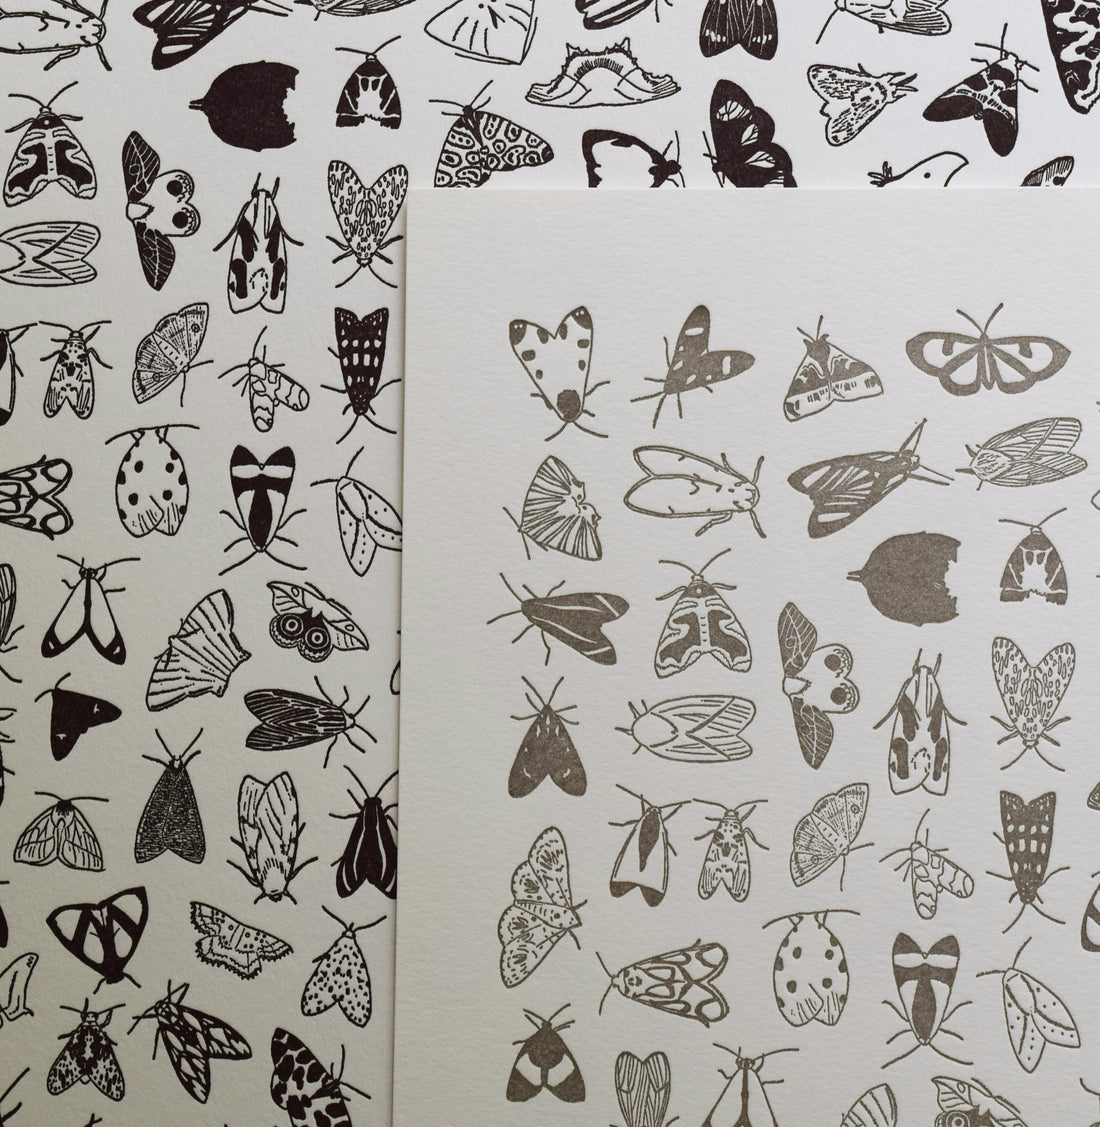 hand-drawn moth species chart printed on archival cotton Lettra paper on Vandercook Universal I letterpress